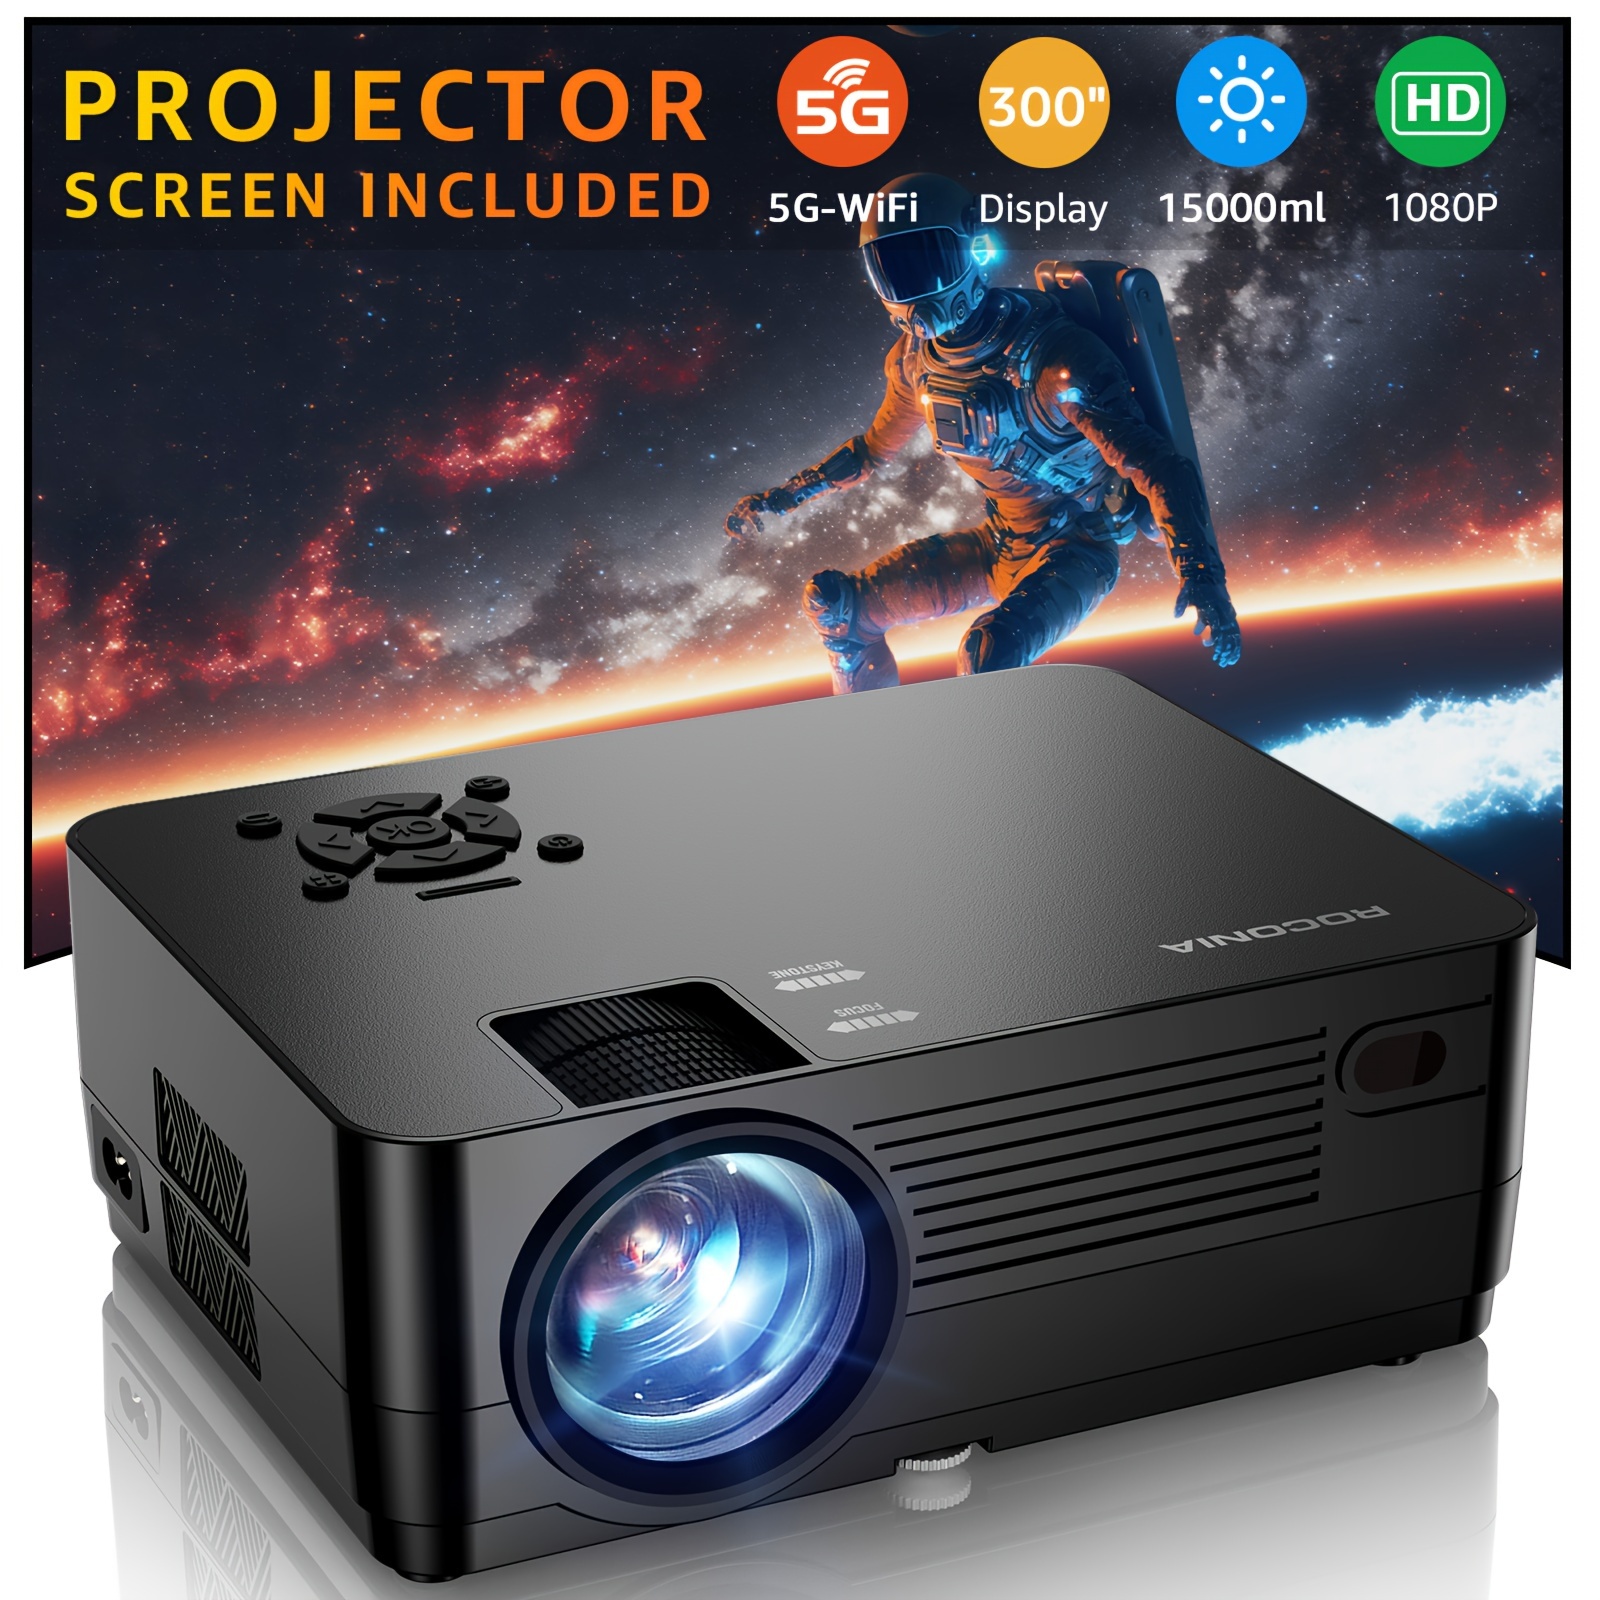 

5g Wifi Wireless Native 1080p Projector[projector Screen Included], 15000lm Full Hd Movie Projector, 300" Display Support 4k Home Theater, Compatible With Ios/android//ps4/tv Stick/hdtv